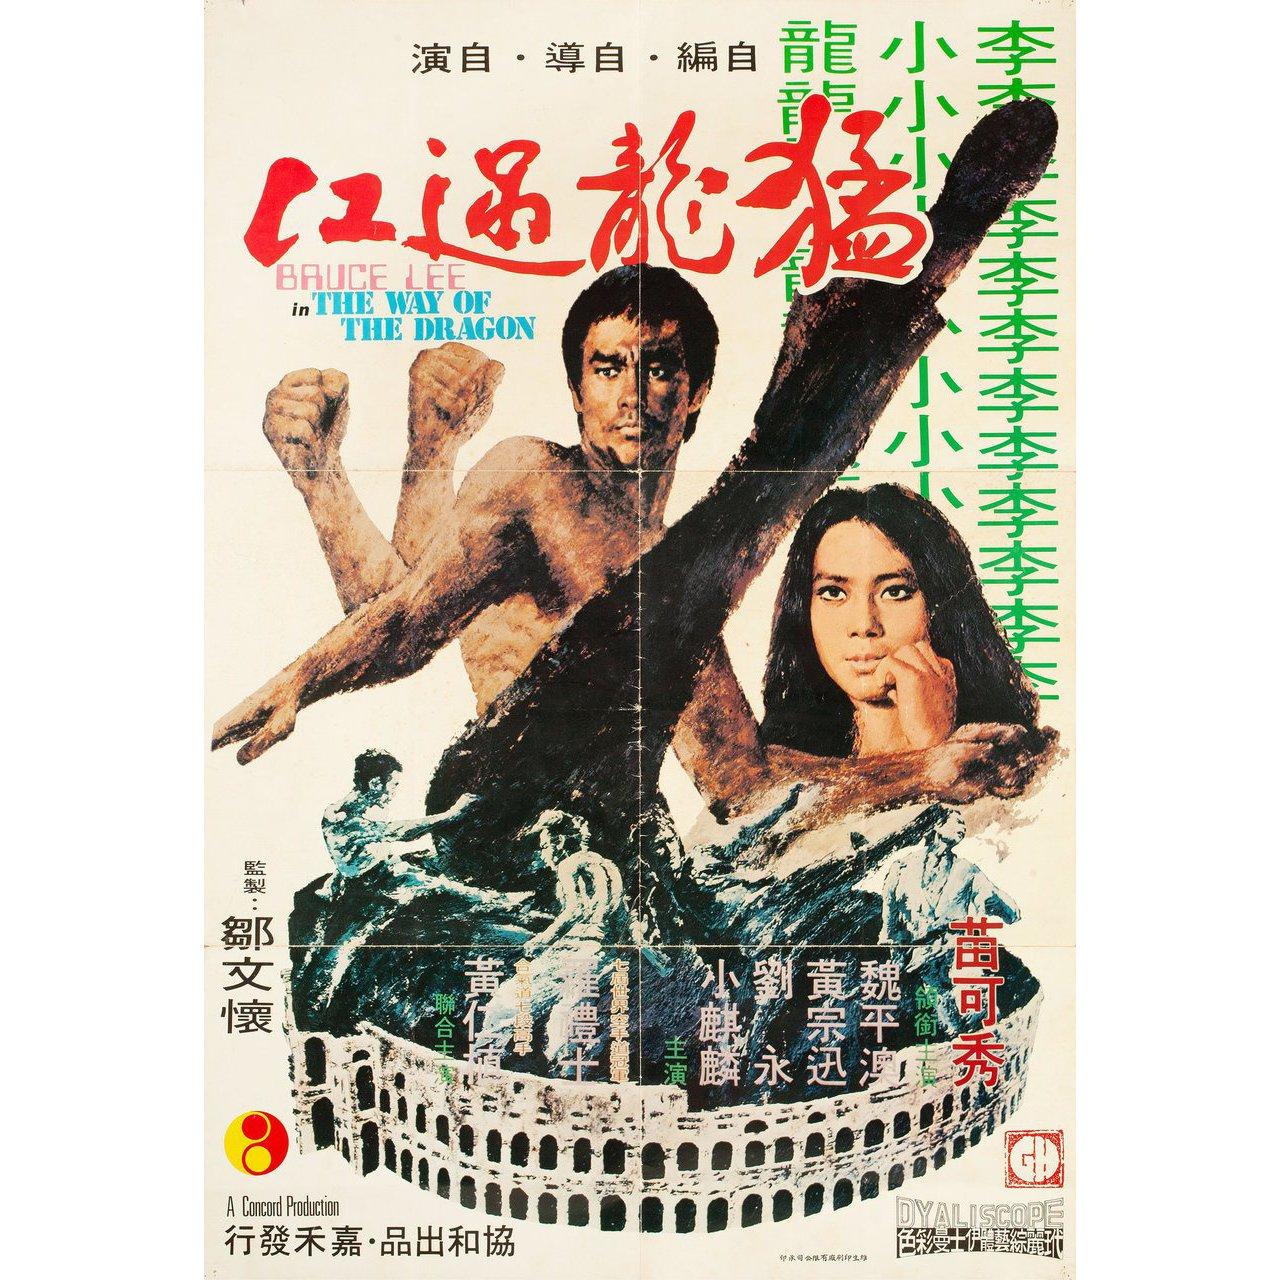 Original 1975 Japanese poster by T. Yyuzn for the first Japanese theatrical release of the 1972 film The Way of the Dragon (Meng long guo jiang) directed by Bruce Lee with Bruce Lee / Nora Miao / Chuck Norris / Ping Ou Wei. Good-Very Good condition,